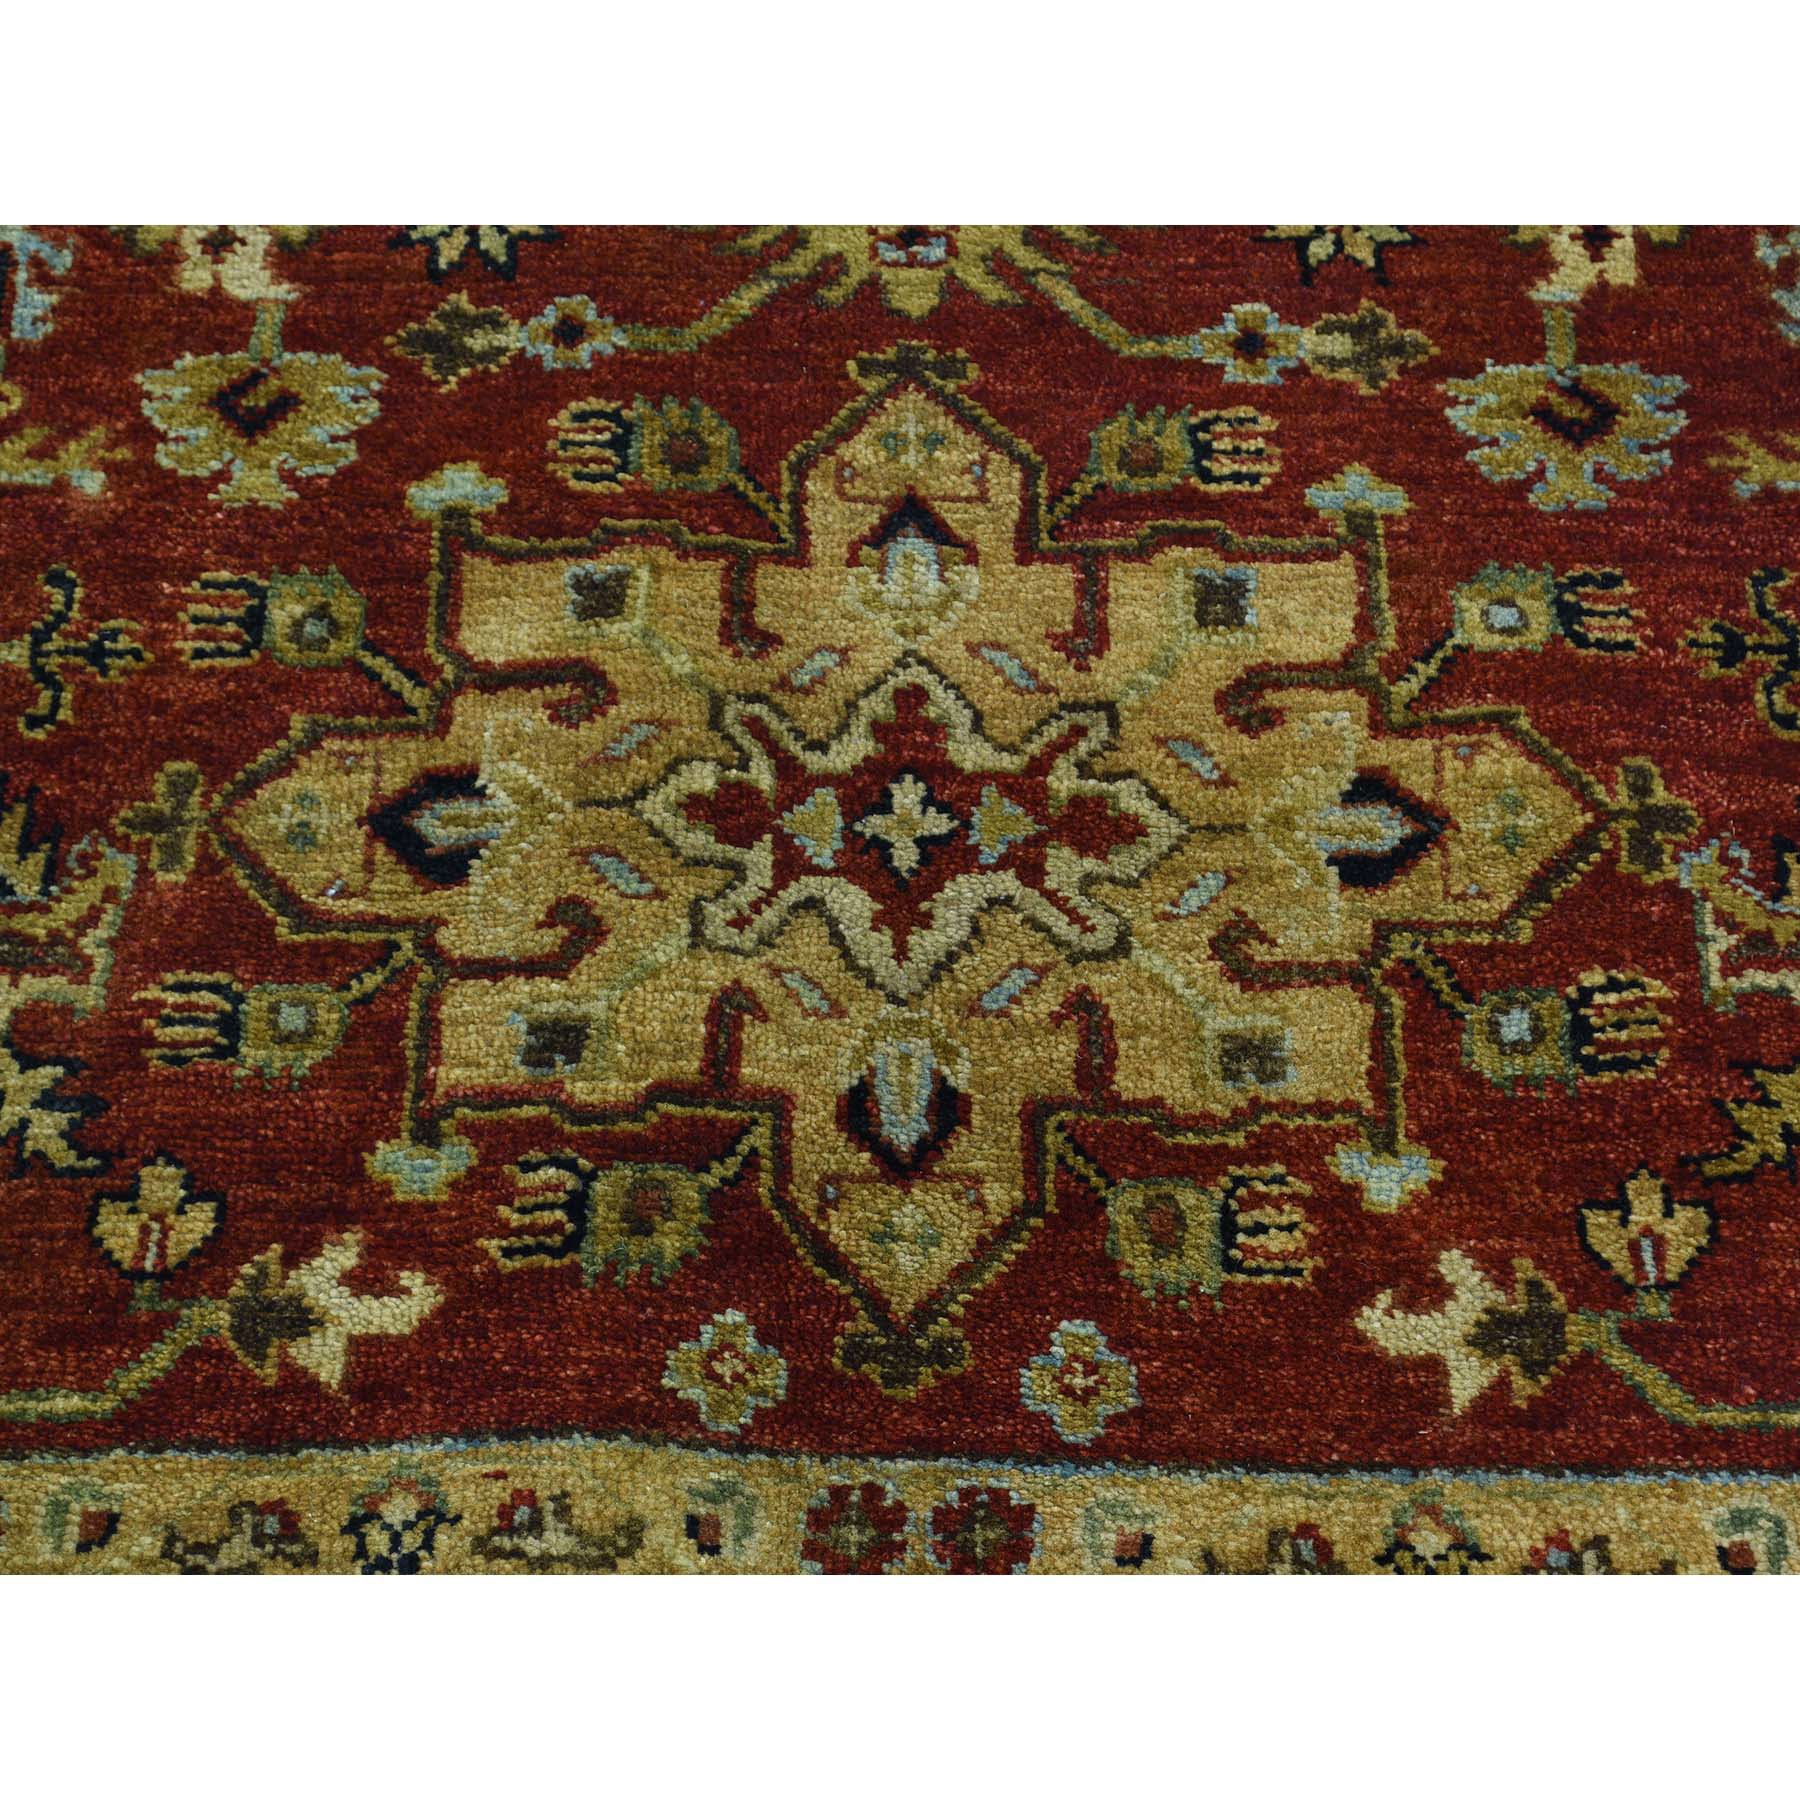 11-9 x15- Hand-Knotted 100 Percent Wool Karajeh Oversize Oriental Rug 